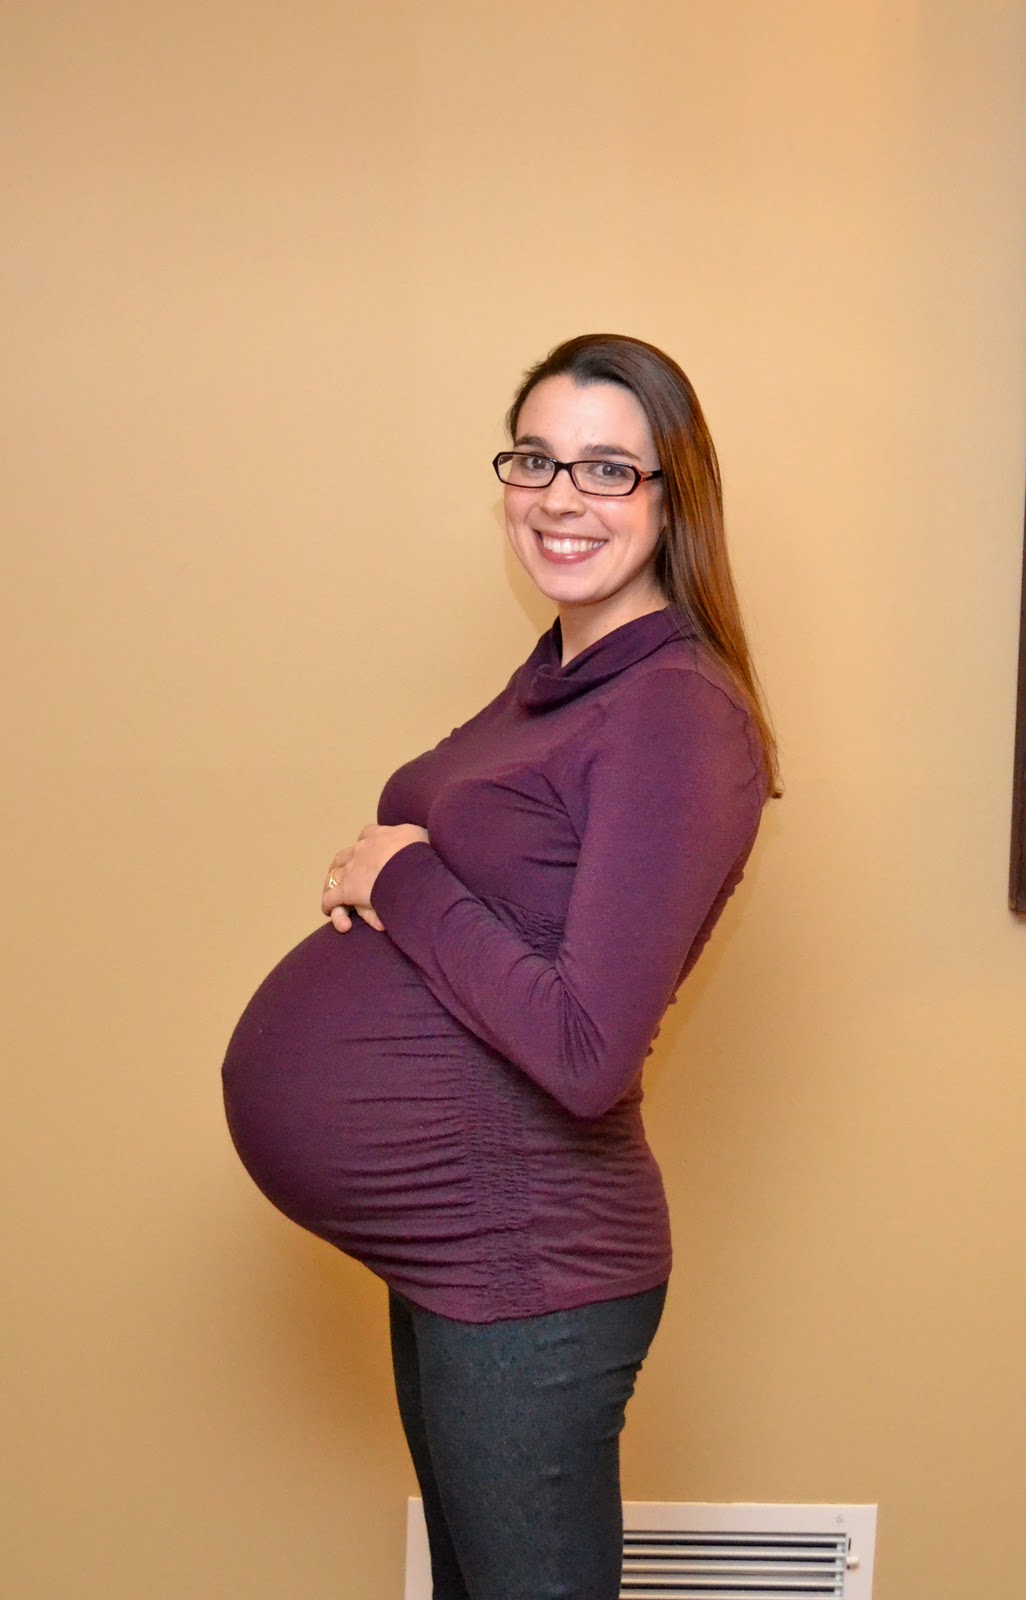 32 weeks pregnant with twin girls